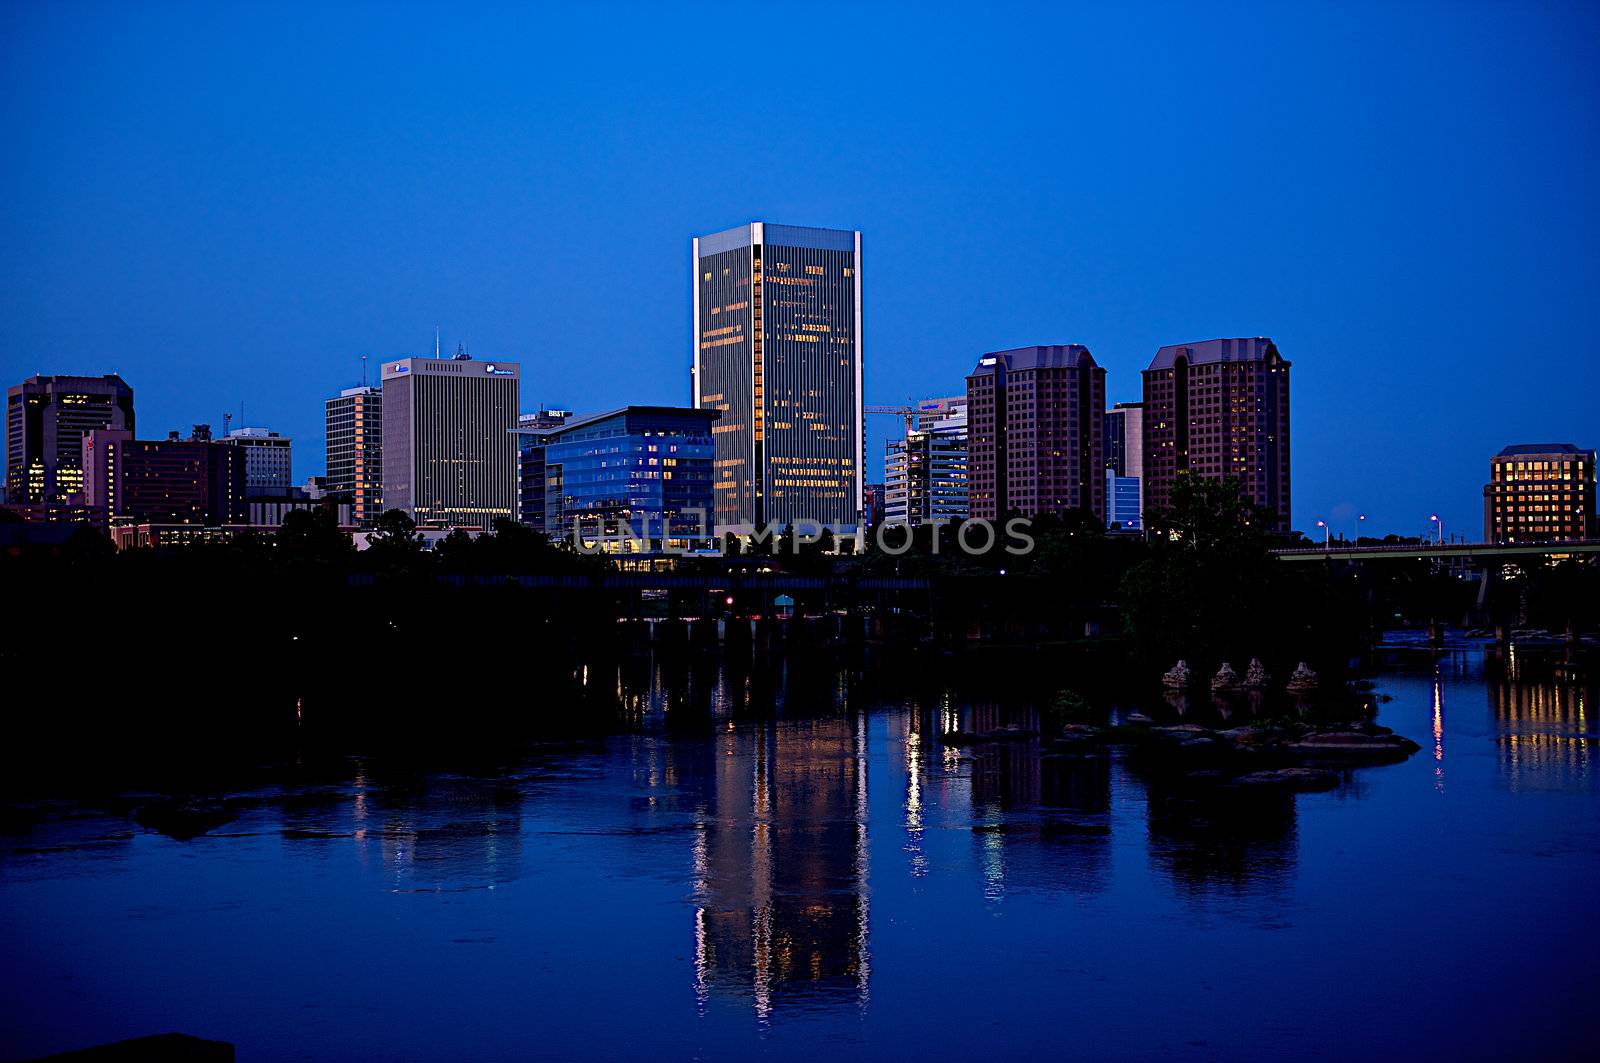 Richmond, Virginia city skyline at night with reflection in the water of the James River.